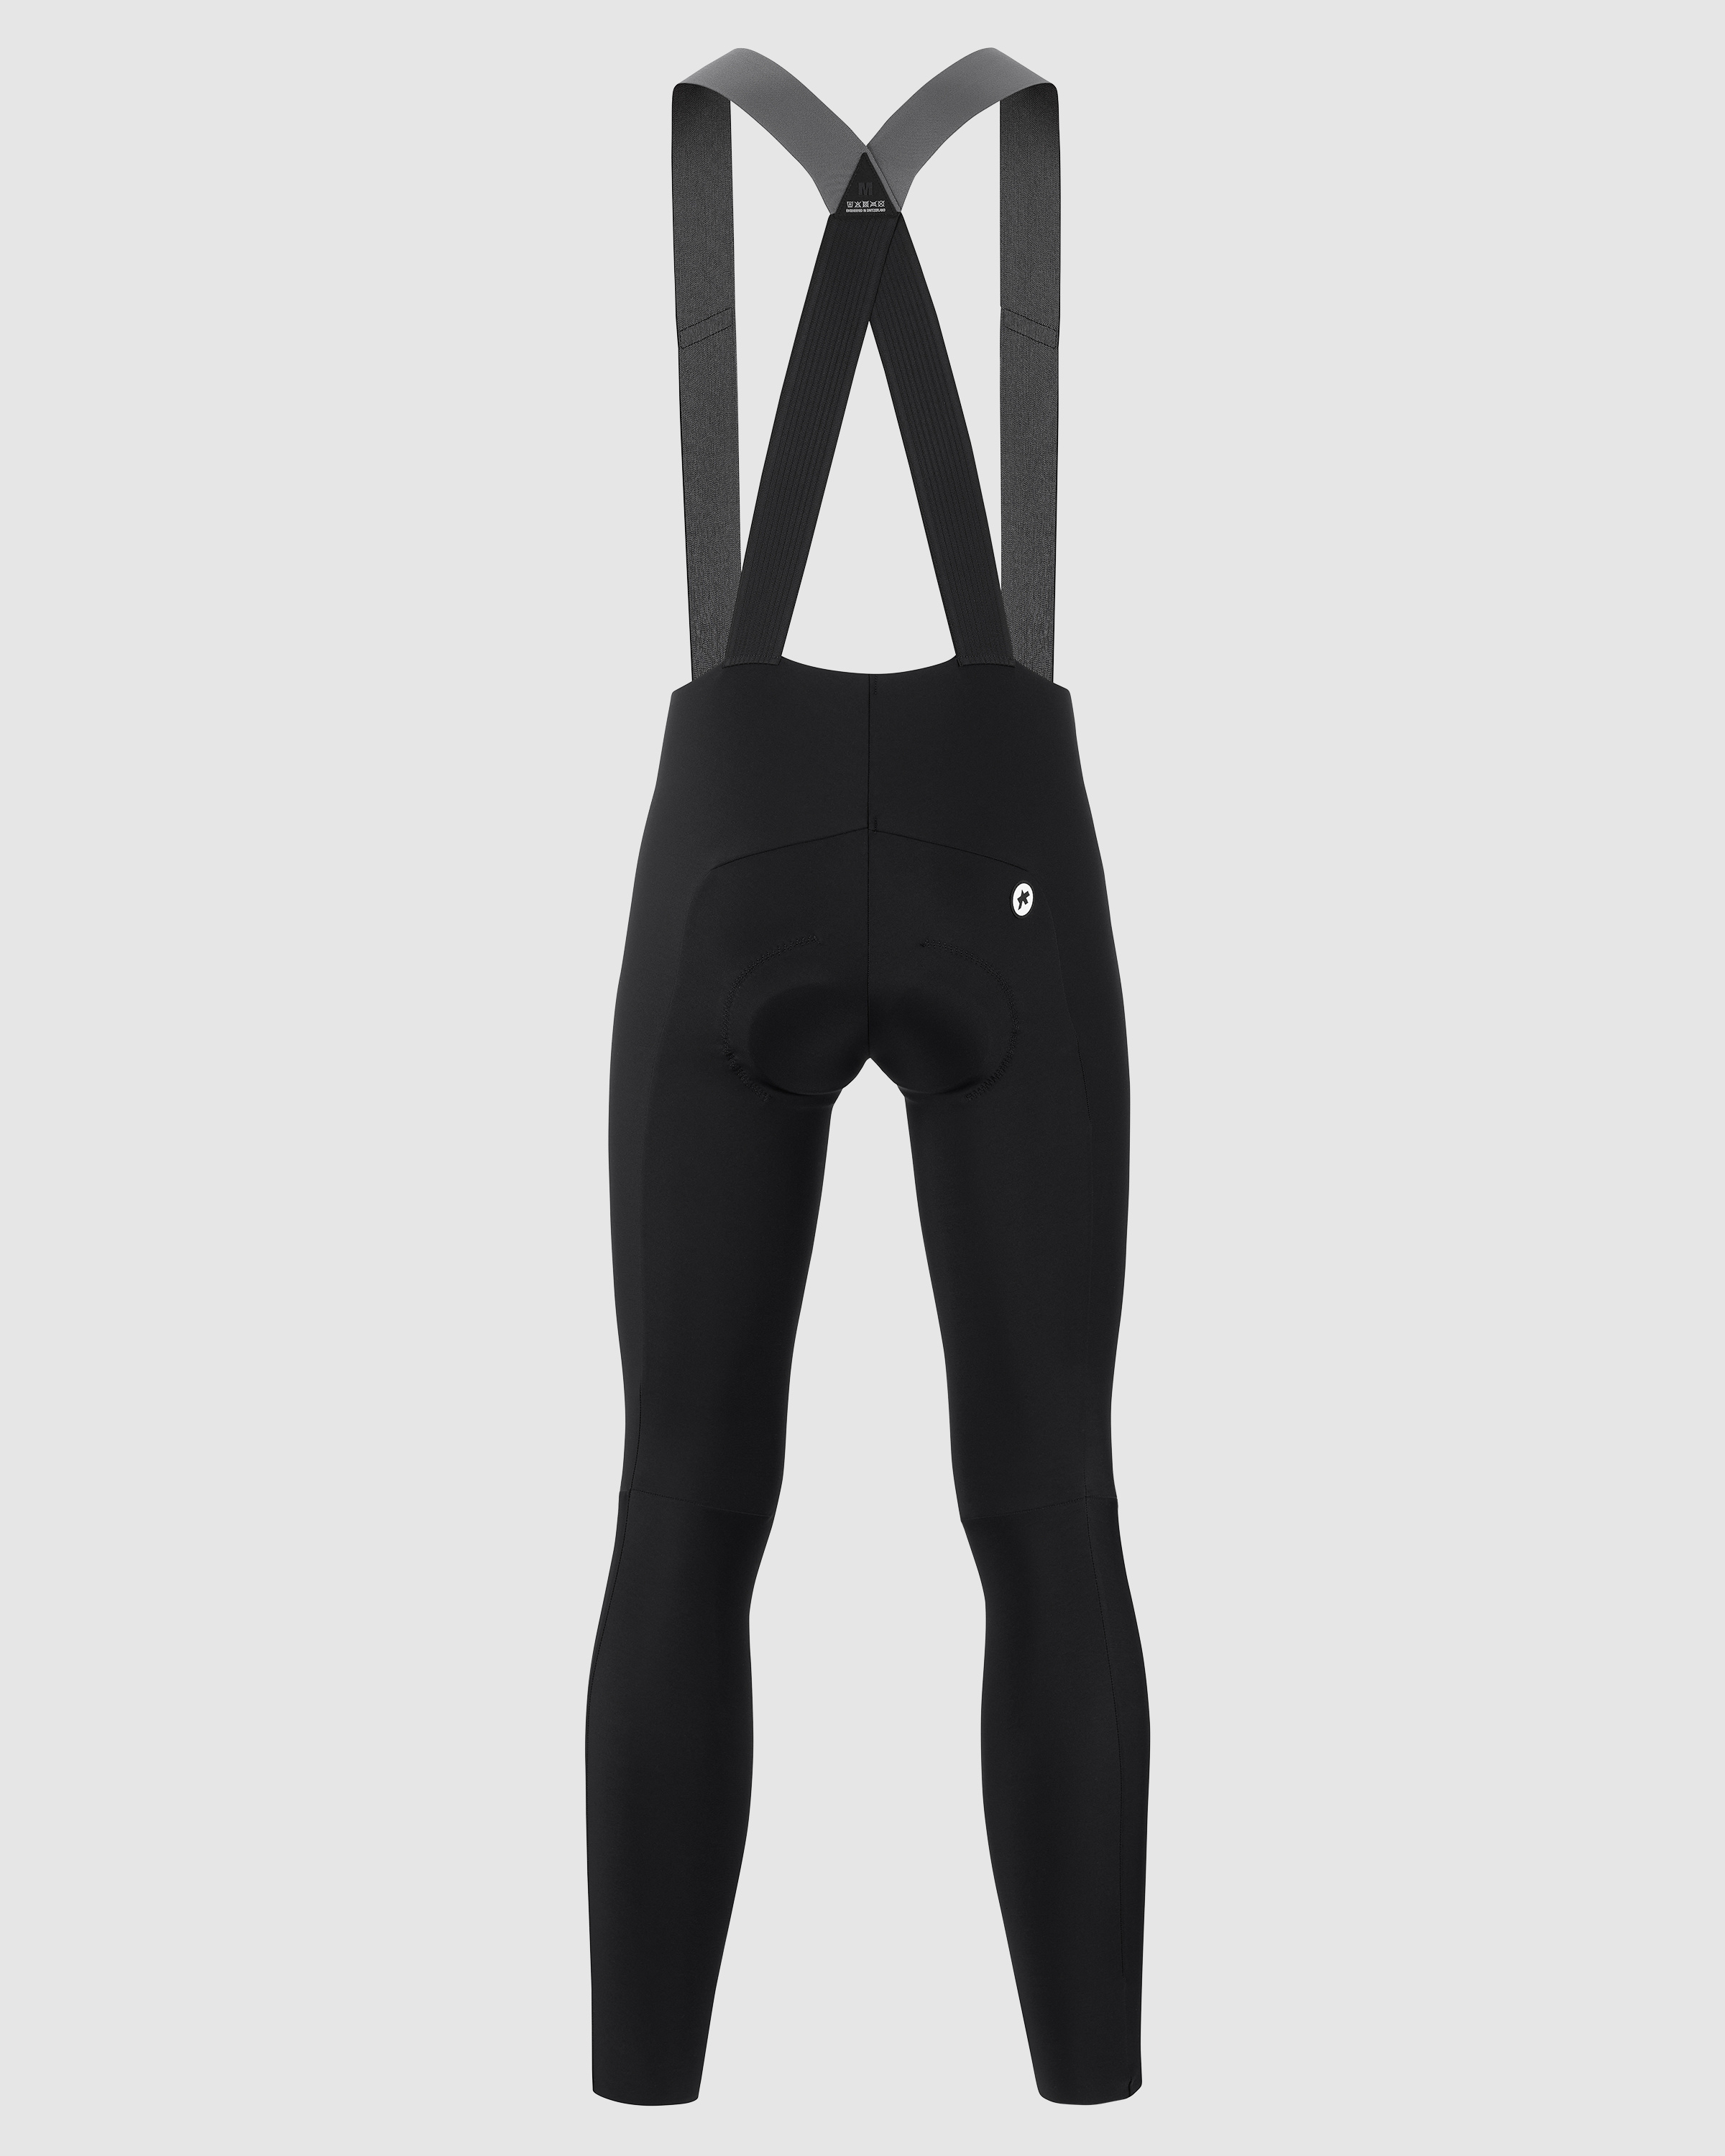 All in Motion Men's Coldweather Form Fit Tights - Black - Size S